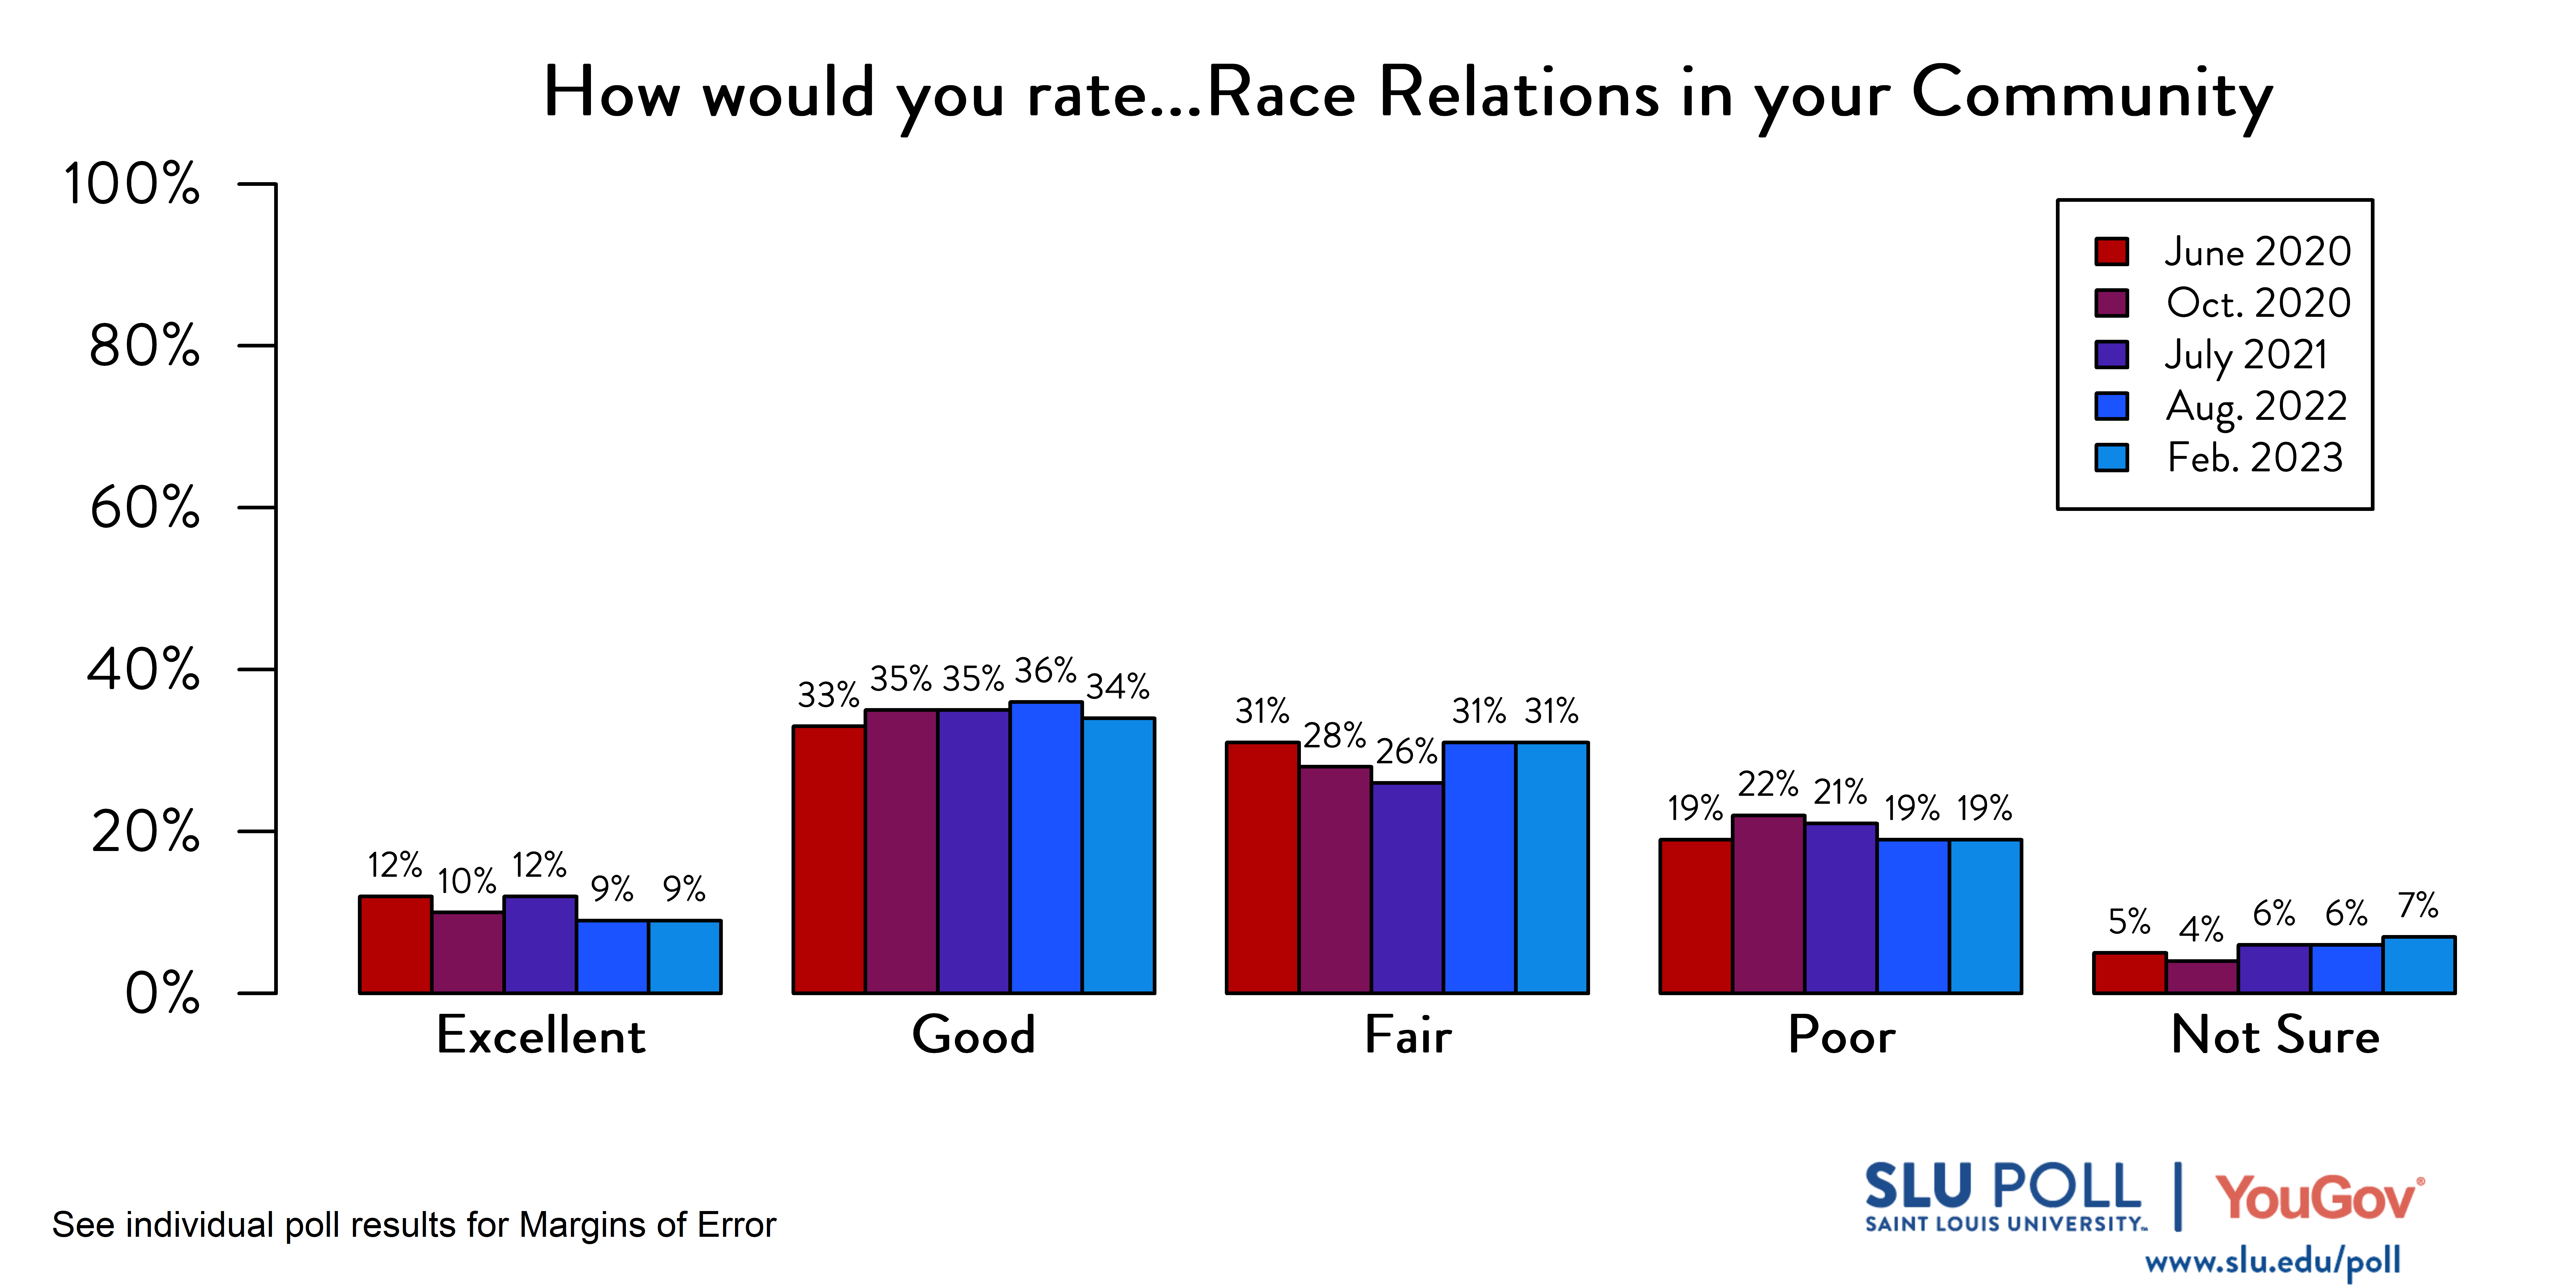 Likely voters' responses to 'How would you rate the condition of the following: Race relations in your community?'. June 2020 Voter Responses 12% Excellent, 33% Good, 31% Fair, 19% Poor, and 5% Not Sure. October 2020 Voter Responses: 10% Excellent, 35% Good, 28% Fair, 22% Poor, and 4% Not sure. July 2021 Voter Responses: 12% Excellent, 35% Good, 26% Fair, 21% Poor, and 6% Not sure. August 2022 Voter Responses: 9% Excellent, 36% Good, 31% Fair, 19% Poor, and 6% Not sure. Februrary 2023 Voter Responses: 9% Excellent, 34% Good, 31% Fair, 19% Poor, and 7% Not sure.